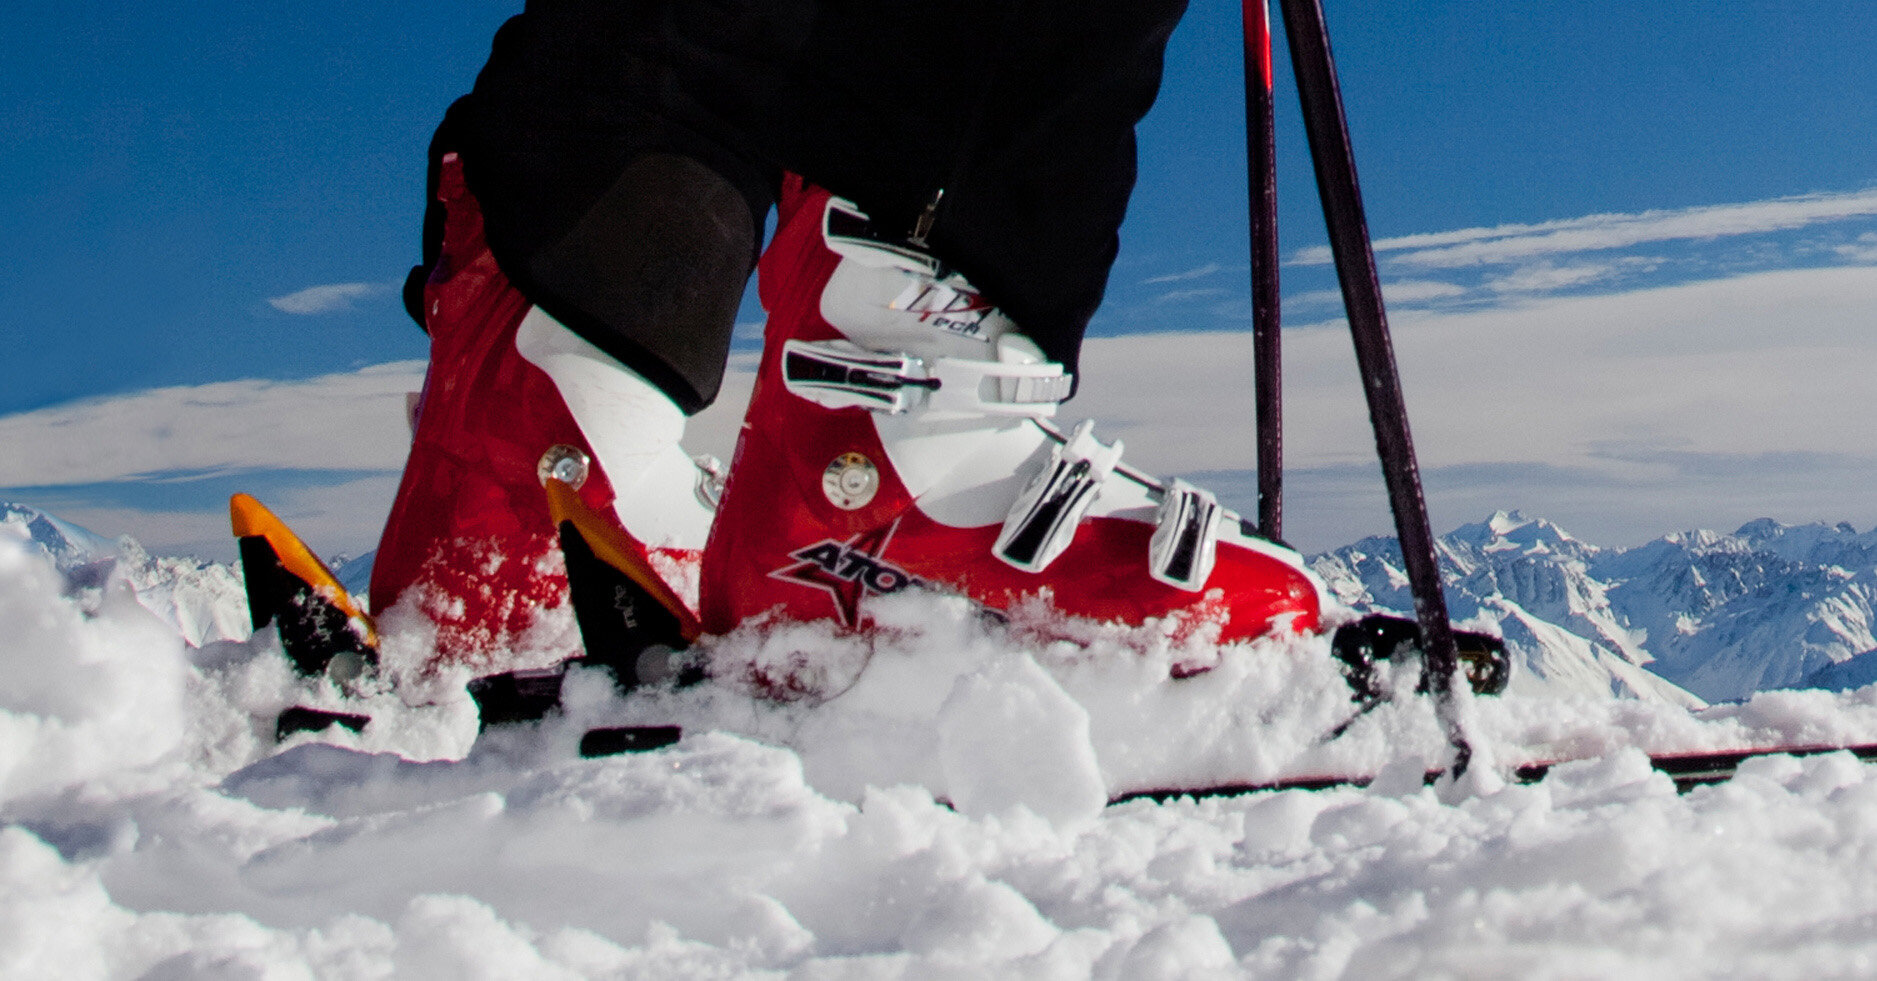 How to Find Ski Boots for Plus Size Calves - Blog